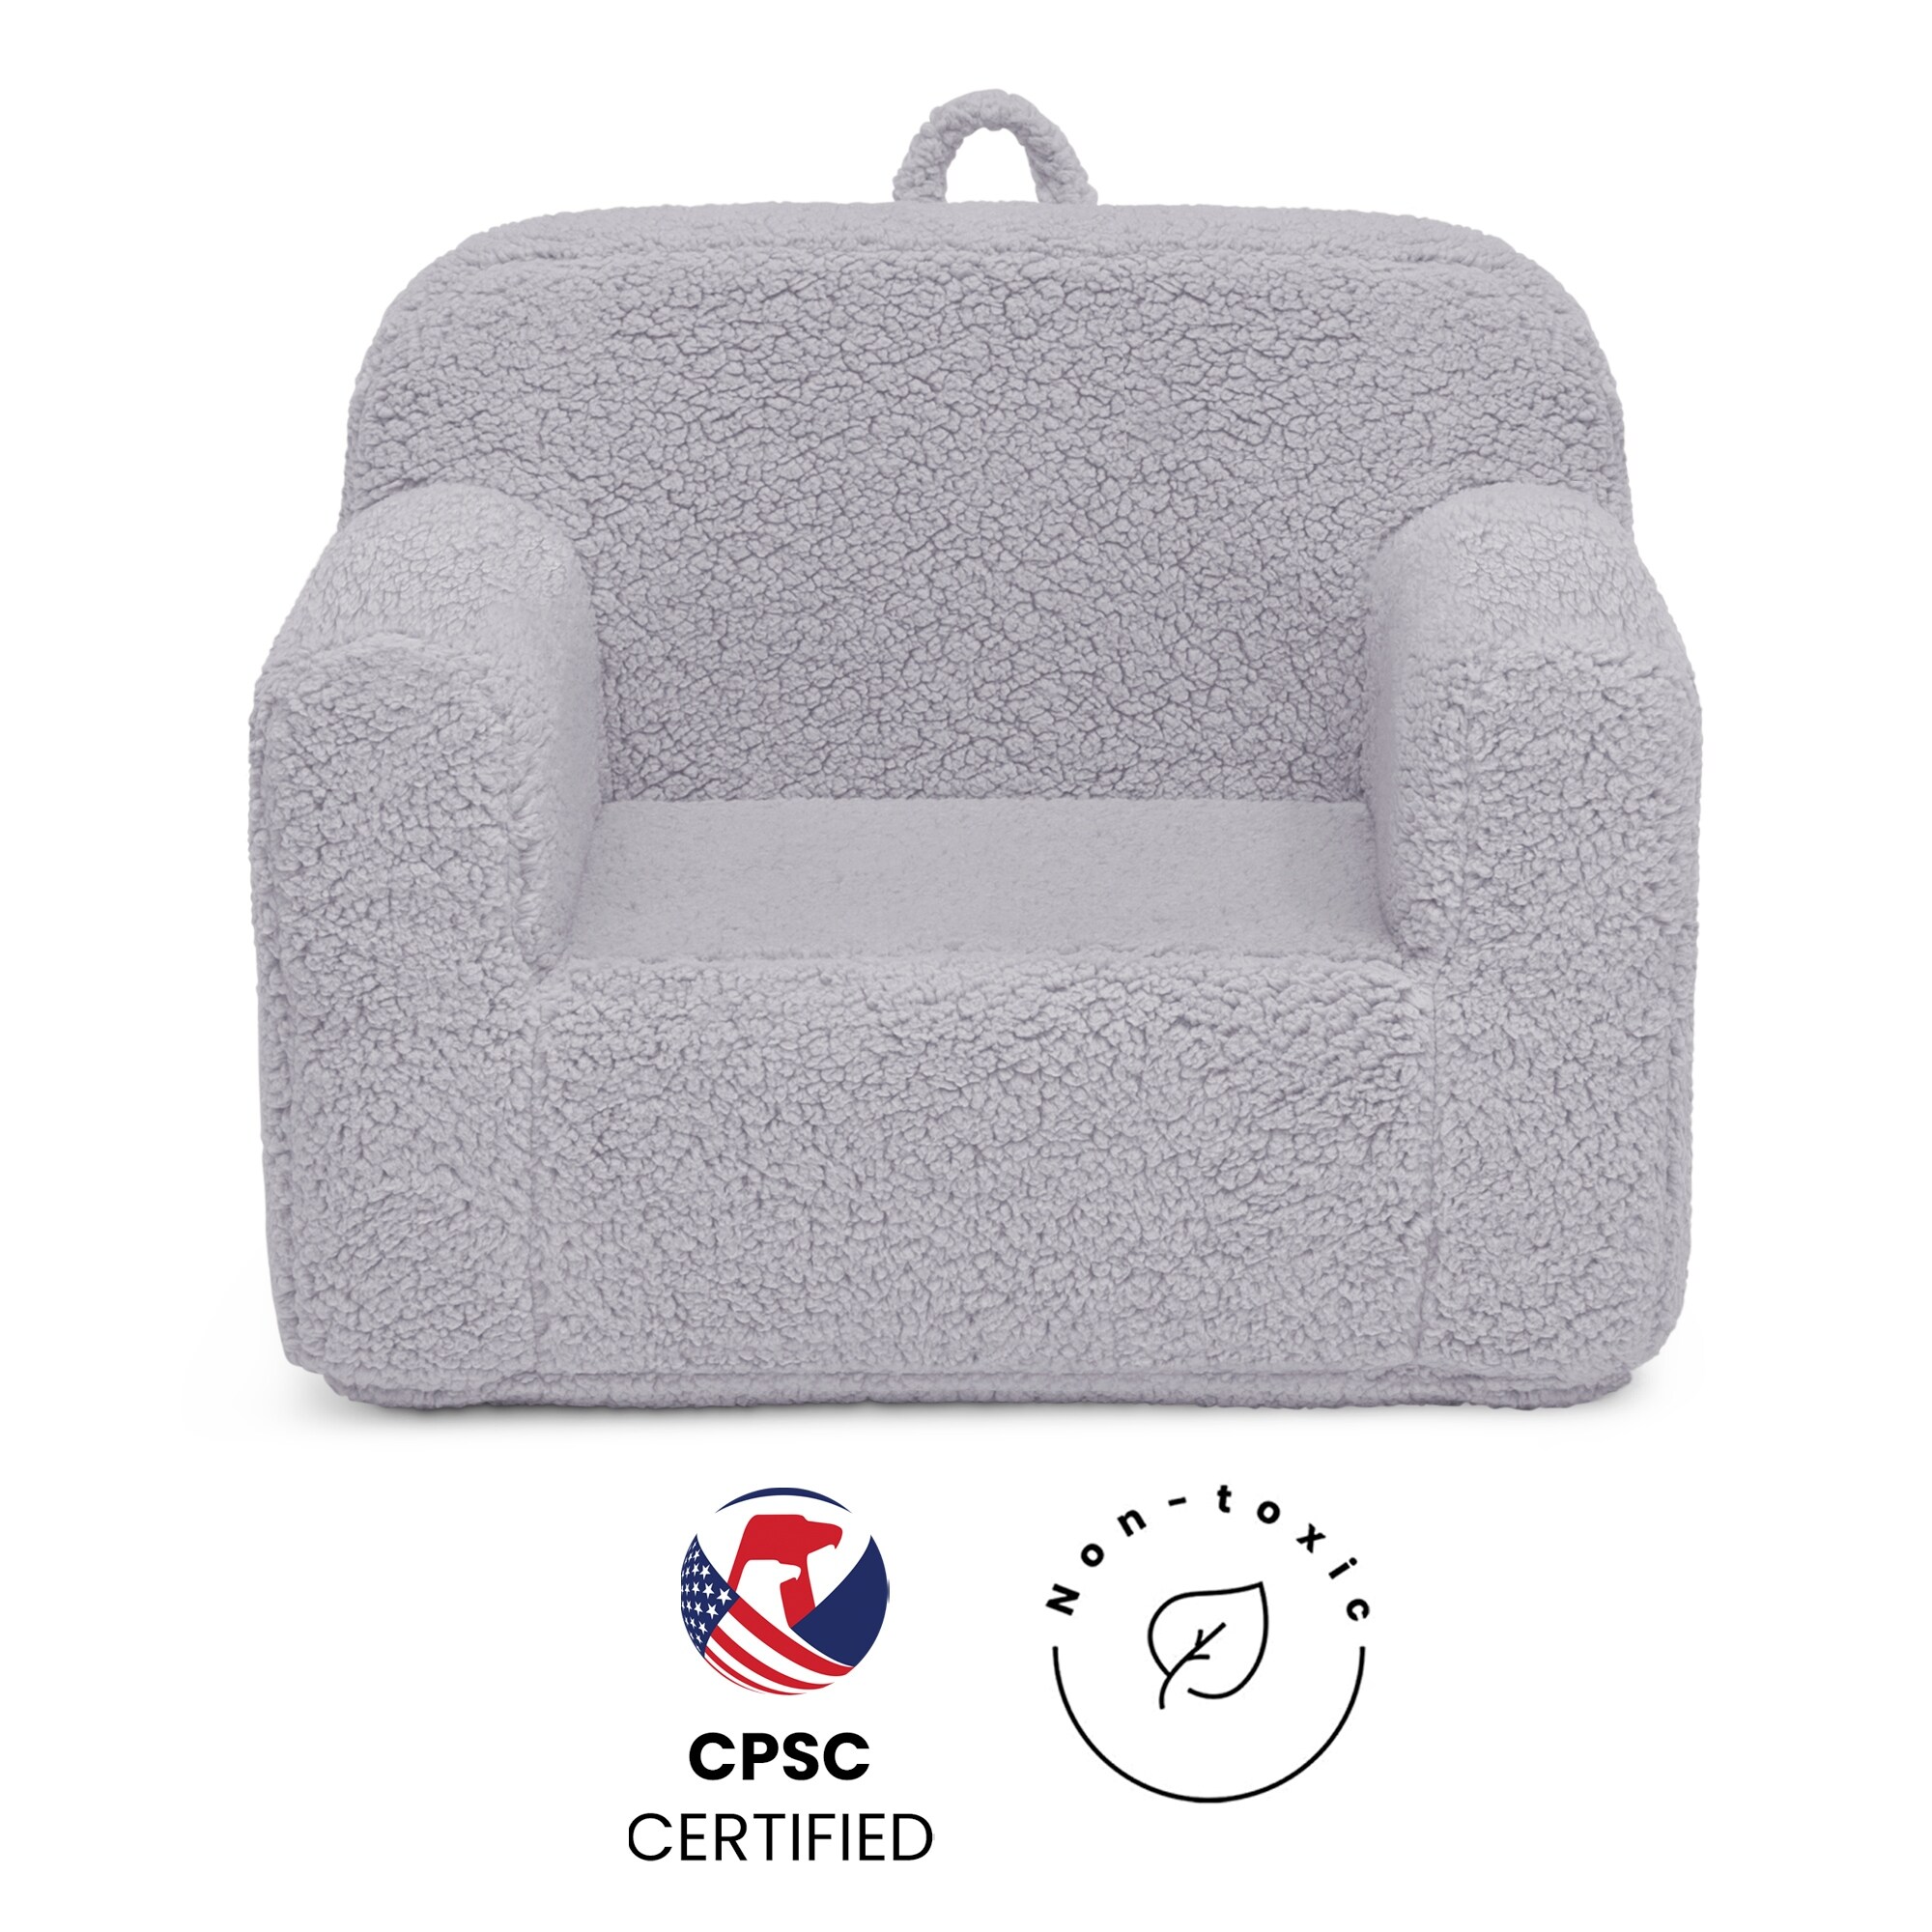 XL Cozee Foam Chair - Perfect Size for Kids Ages 18